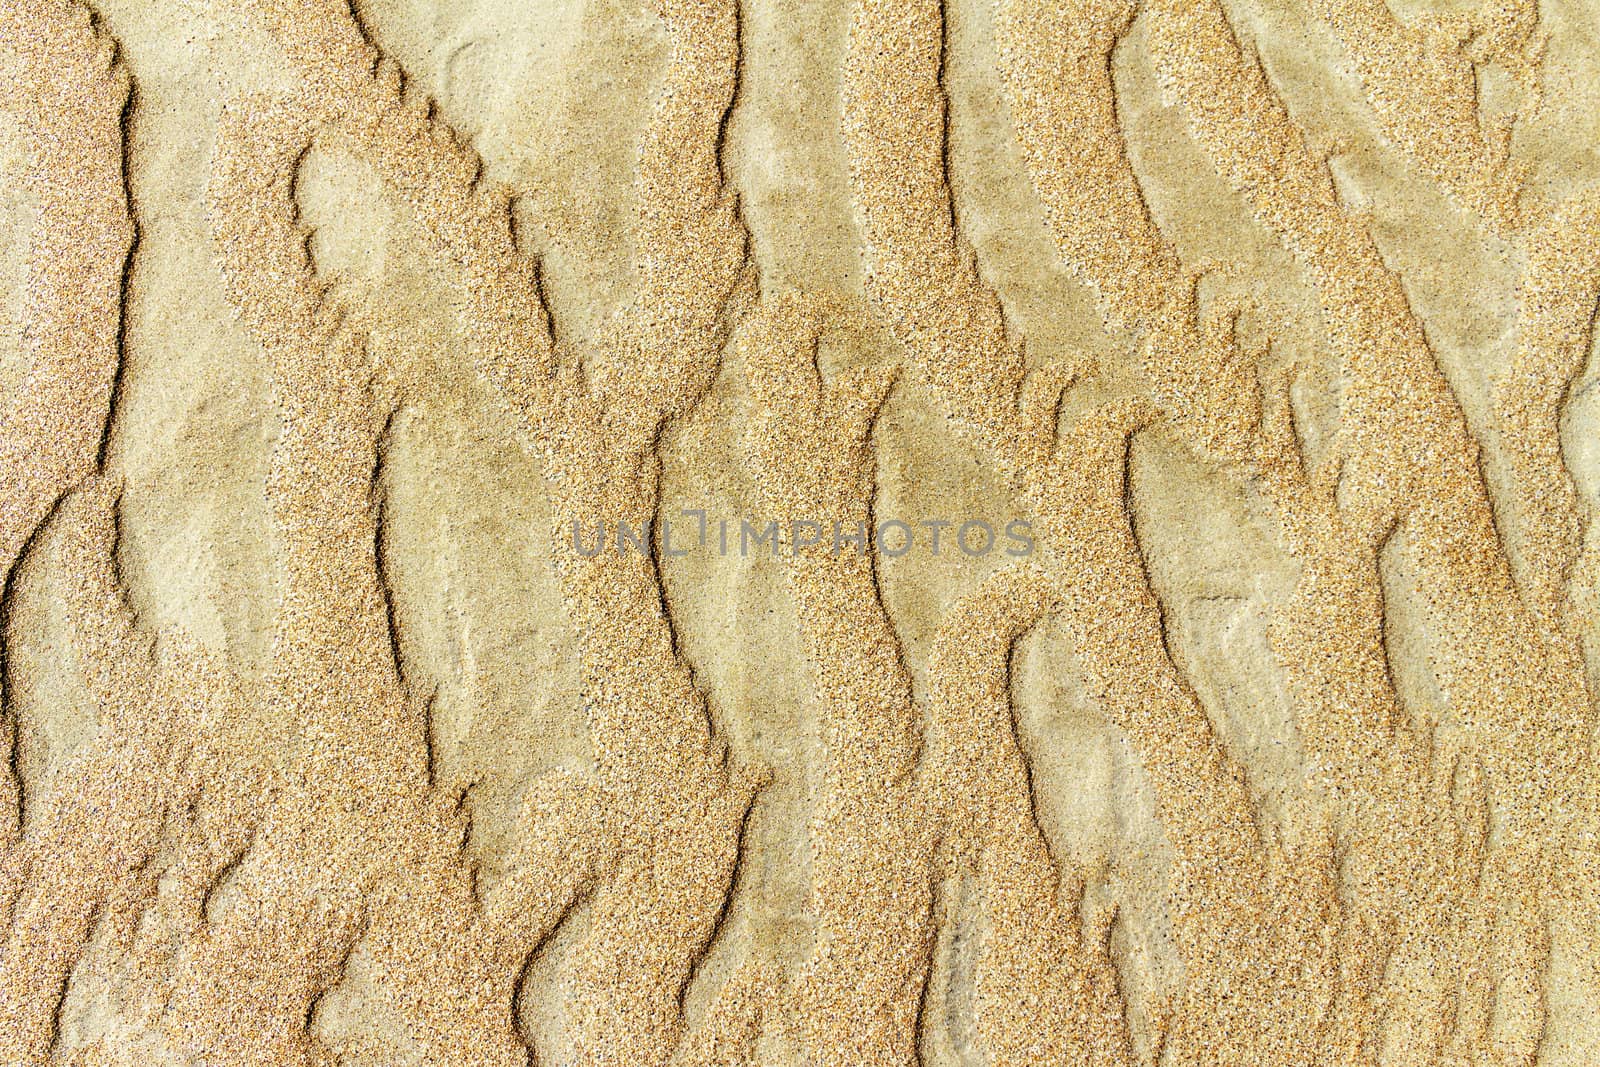 	
patterns of erosion of sand in the background